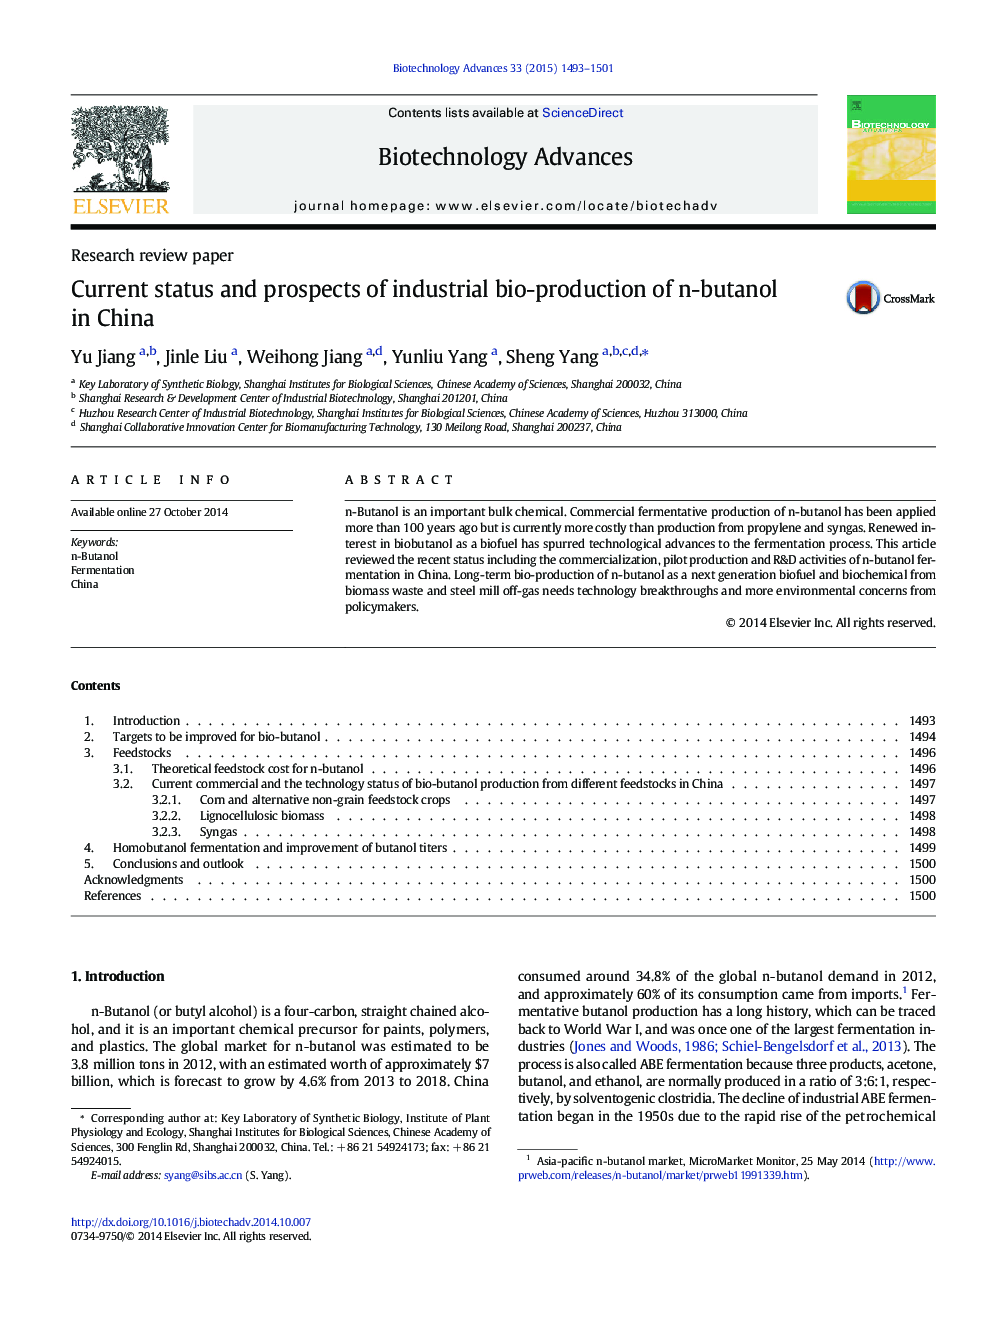 Current status and prospects of industrial bio-production of n-butanol in China